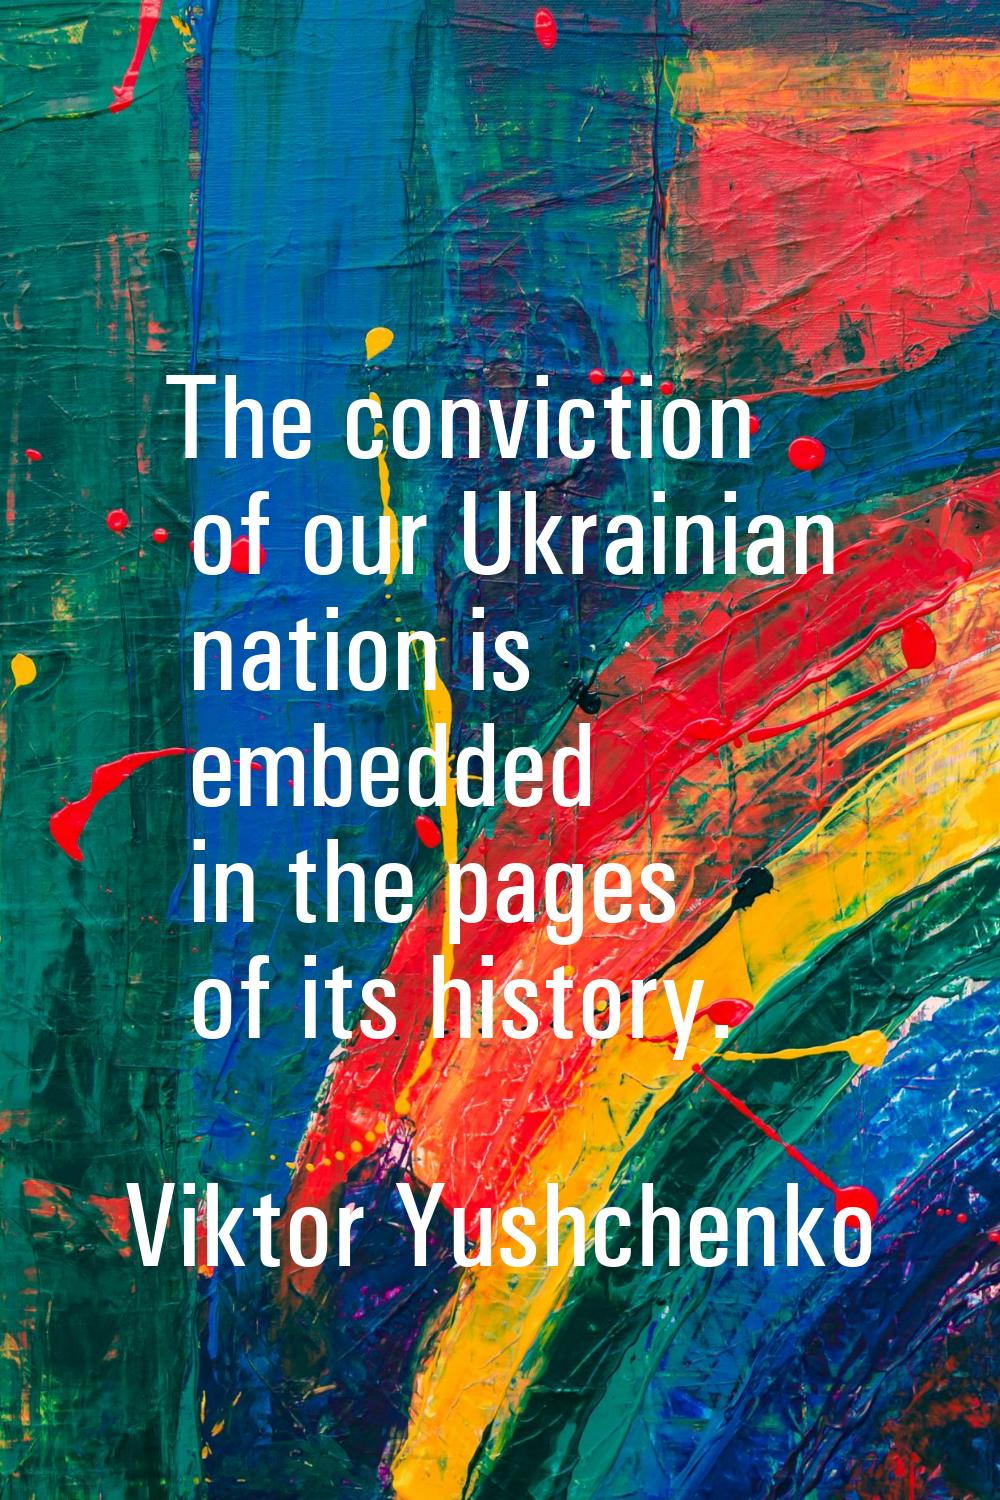 The conviction of our Ukrainian nation is embedded in the pages of its history.